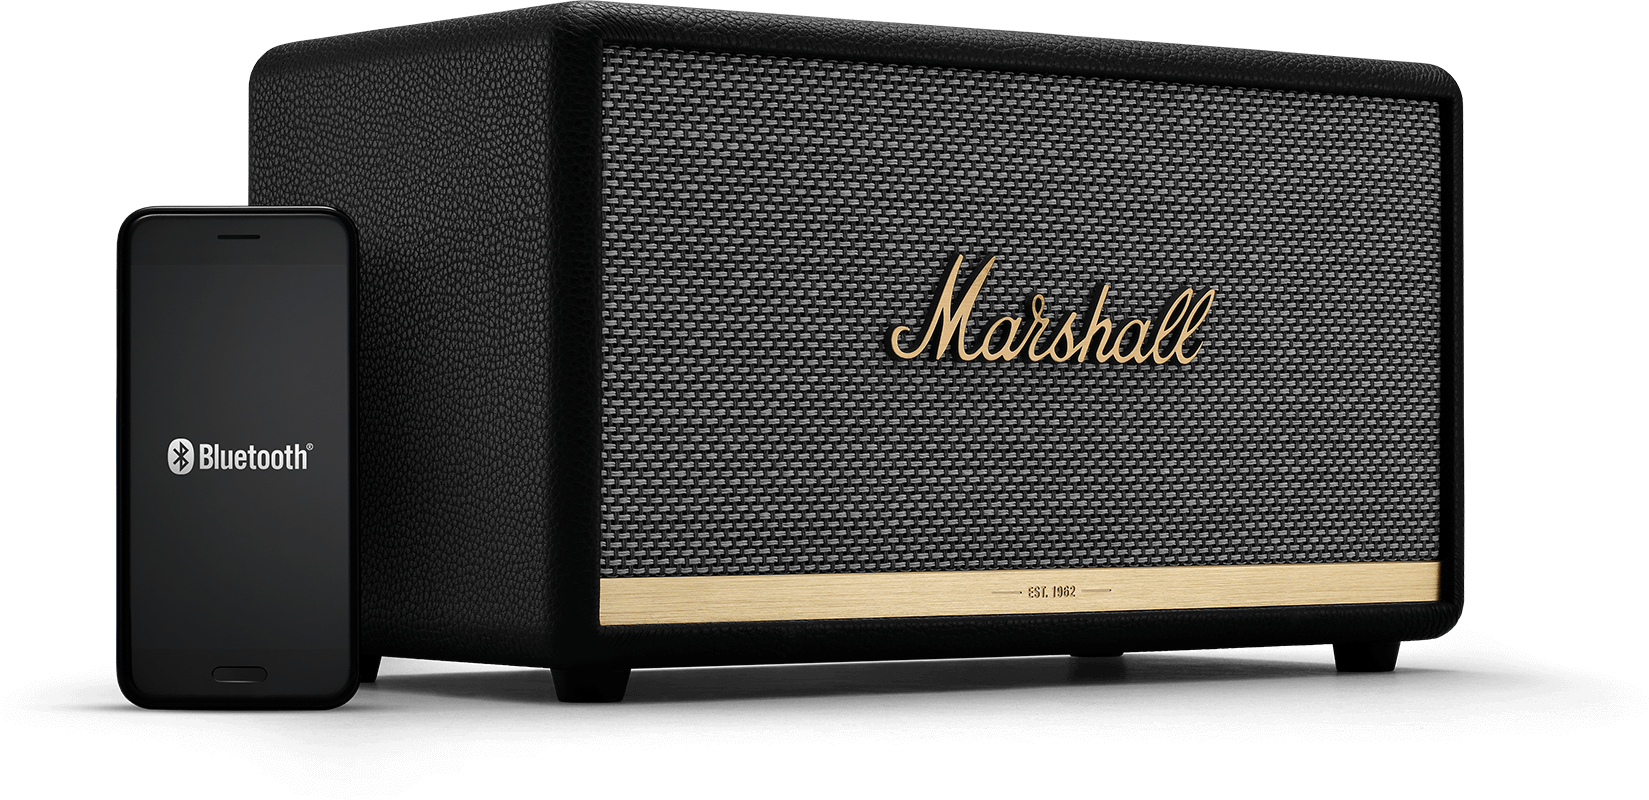 Marshall Stanmore II Wireless Stereo Larger Than Life Sound Speaker,  Wirelessly Connected Bluetooth